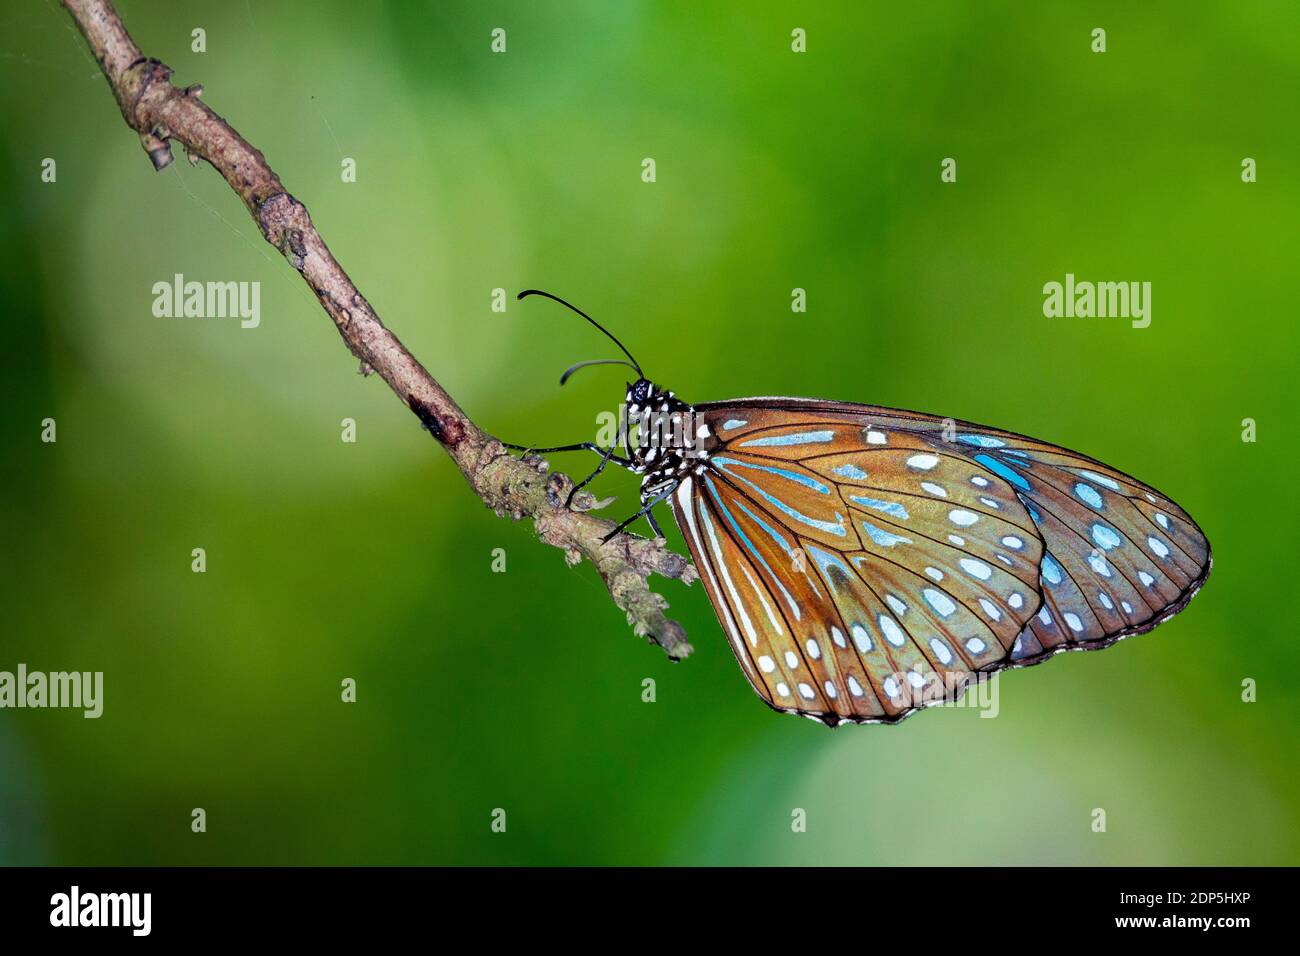 Image of a butterfly (The Pale Blue Tiger) on nature background. Insect Animal Stock Photo